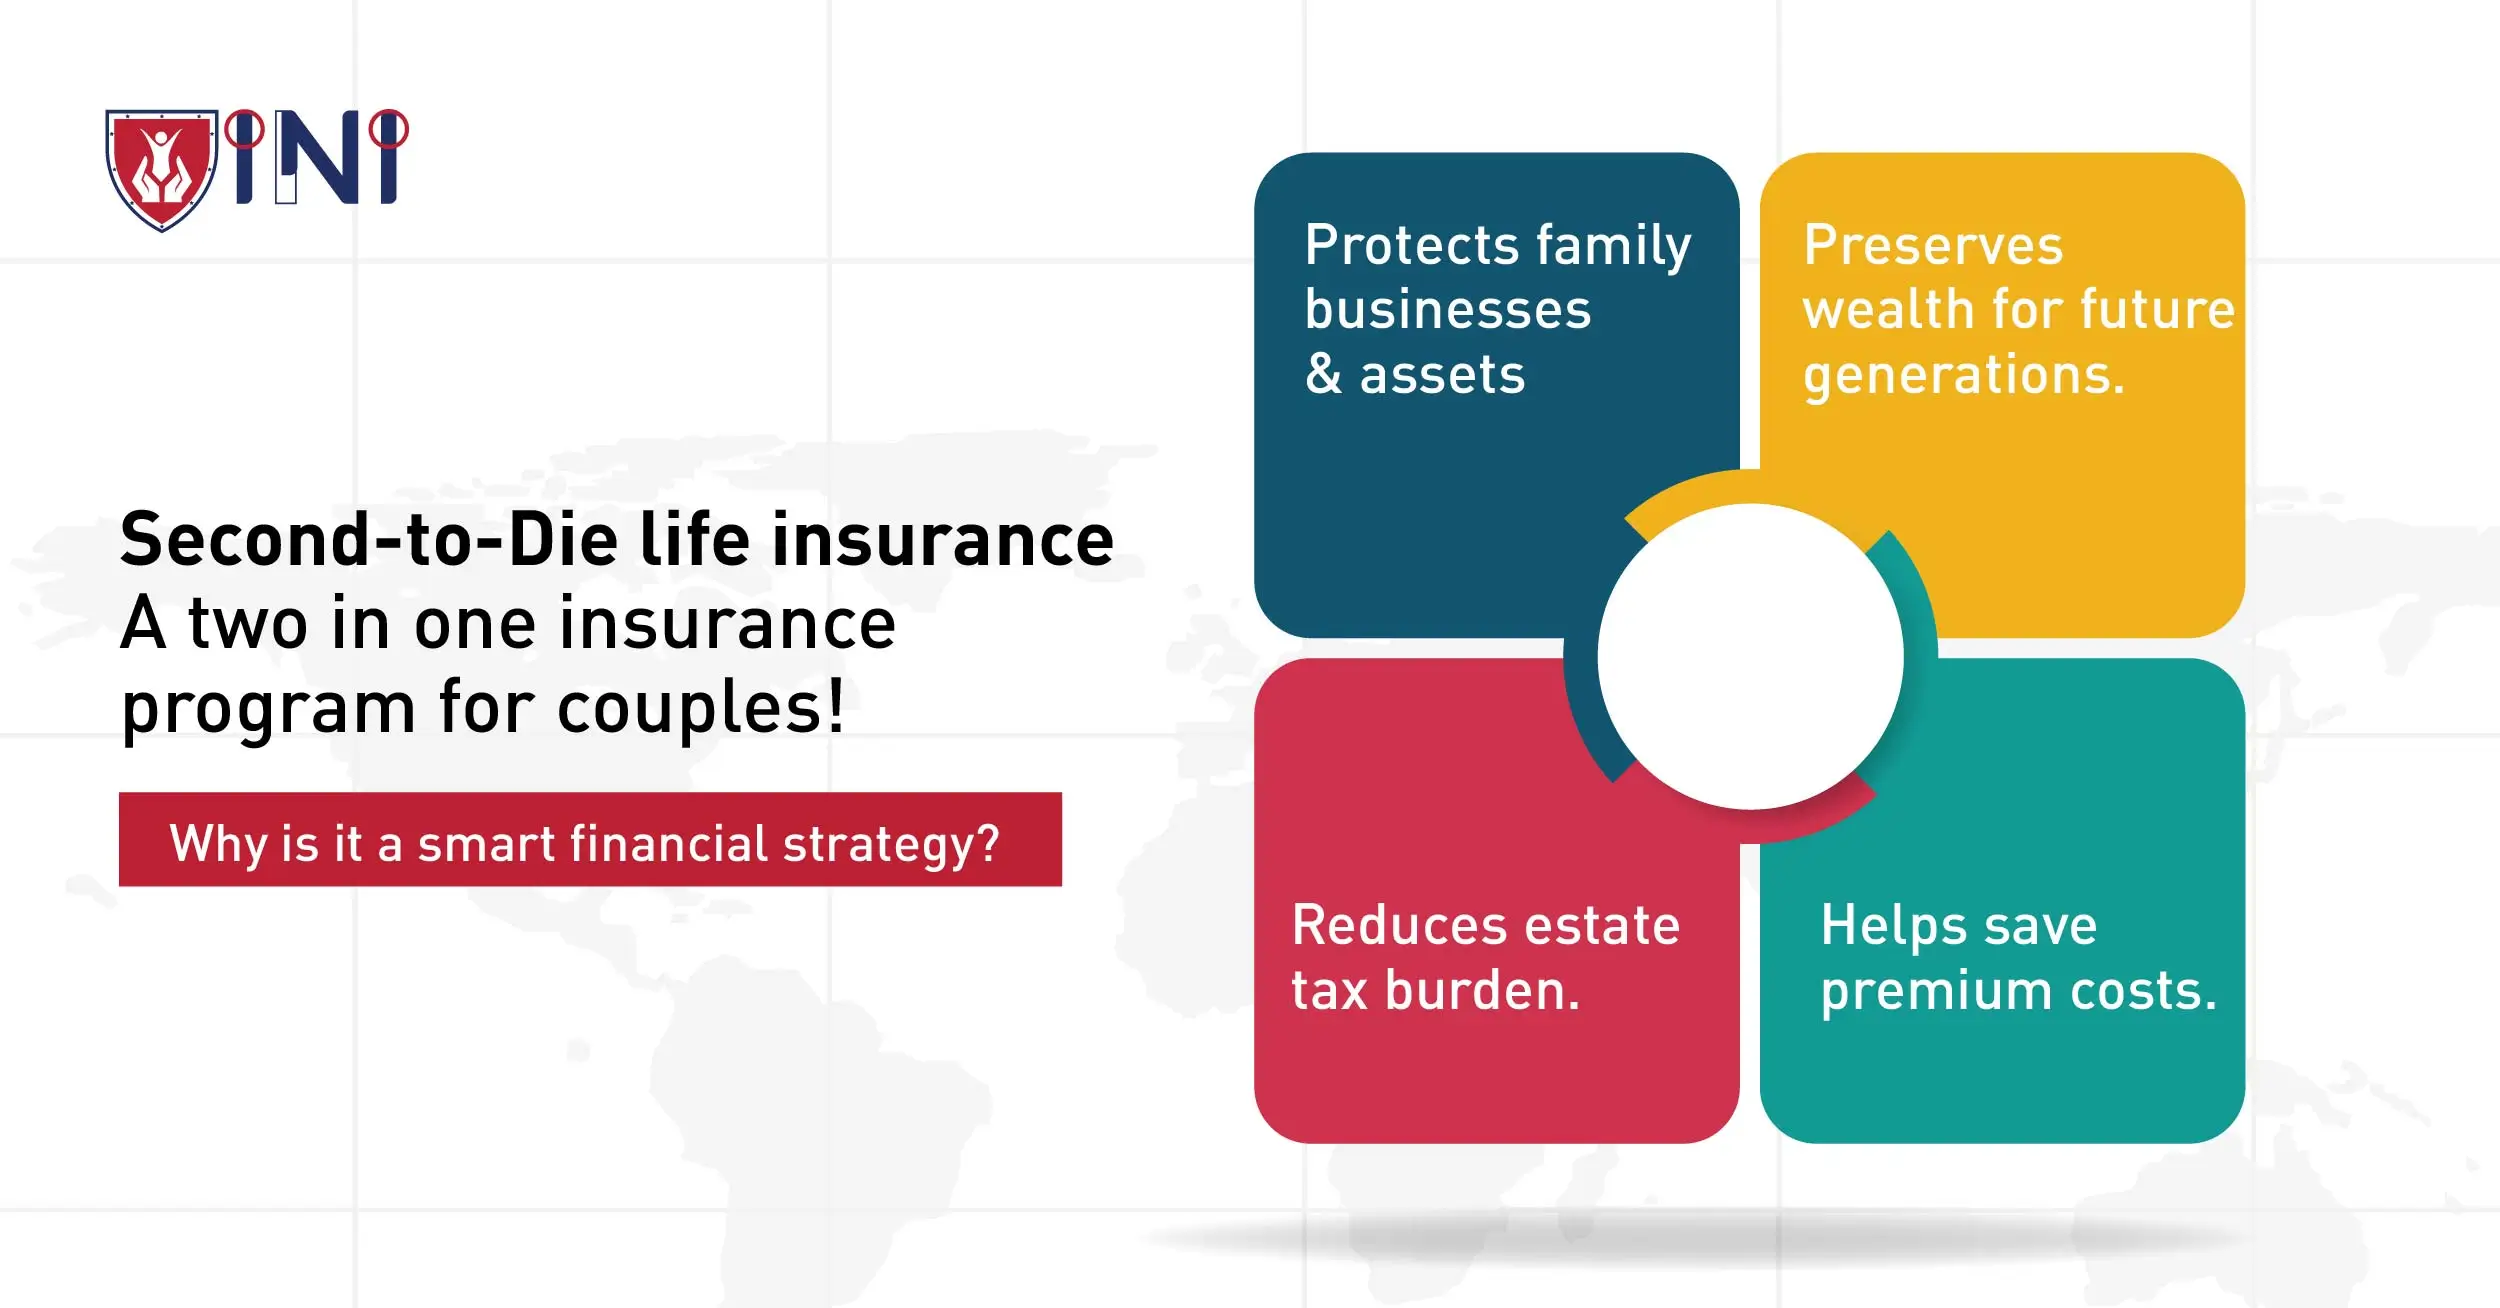 Second-to-Die life insurance - A two in one insurance program.